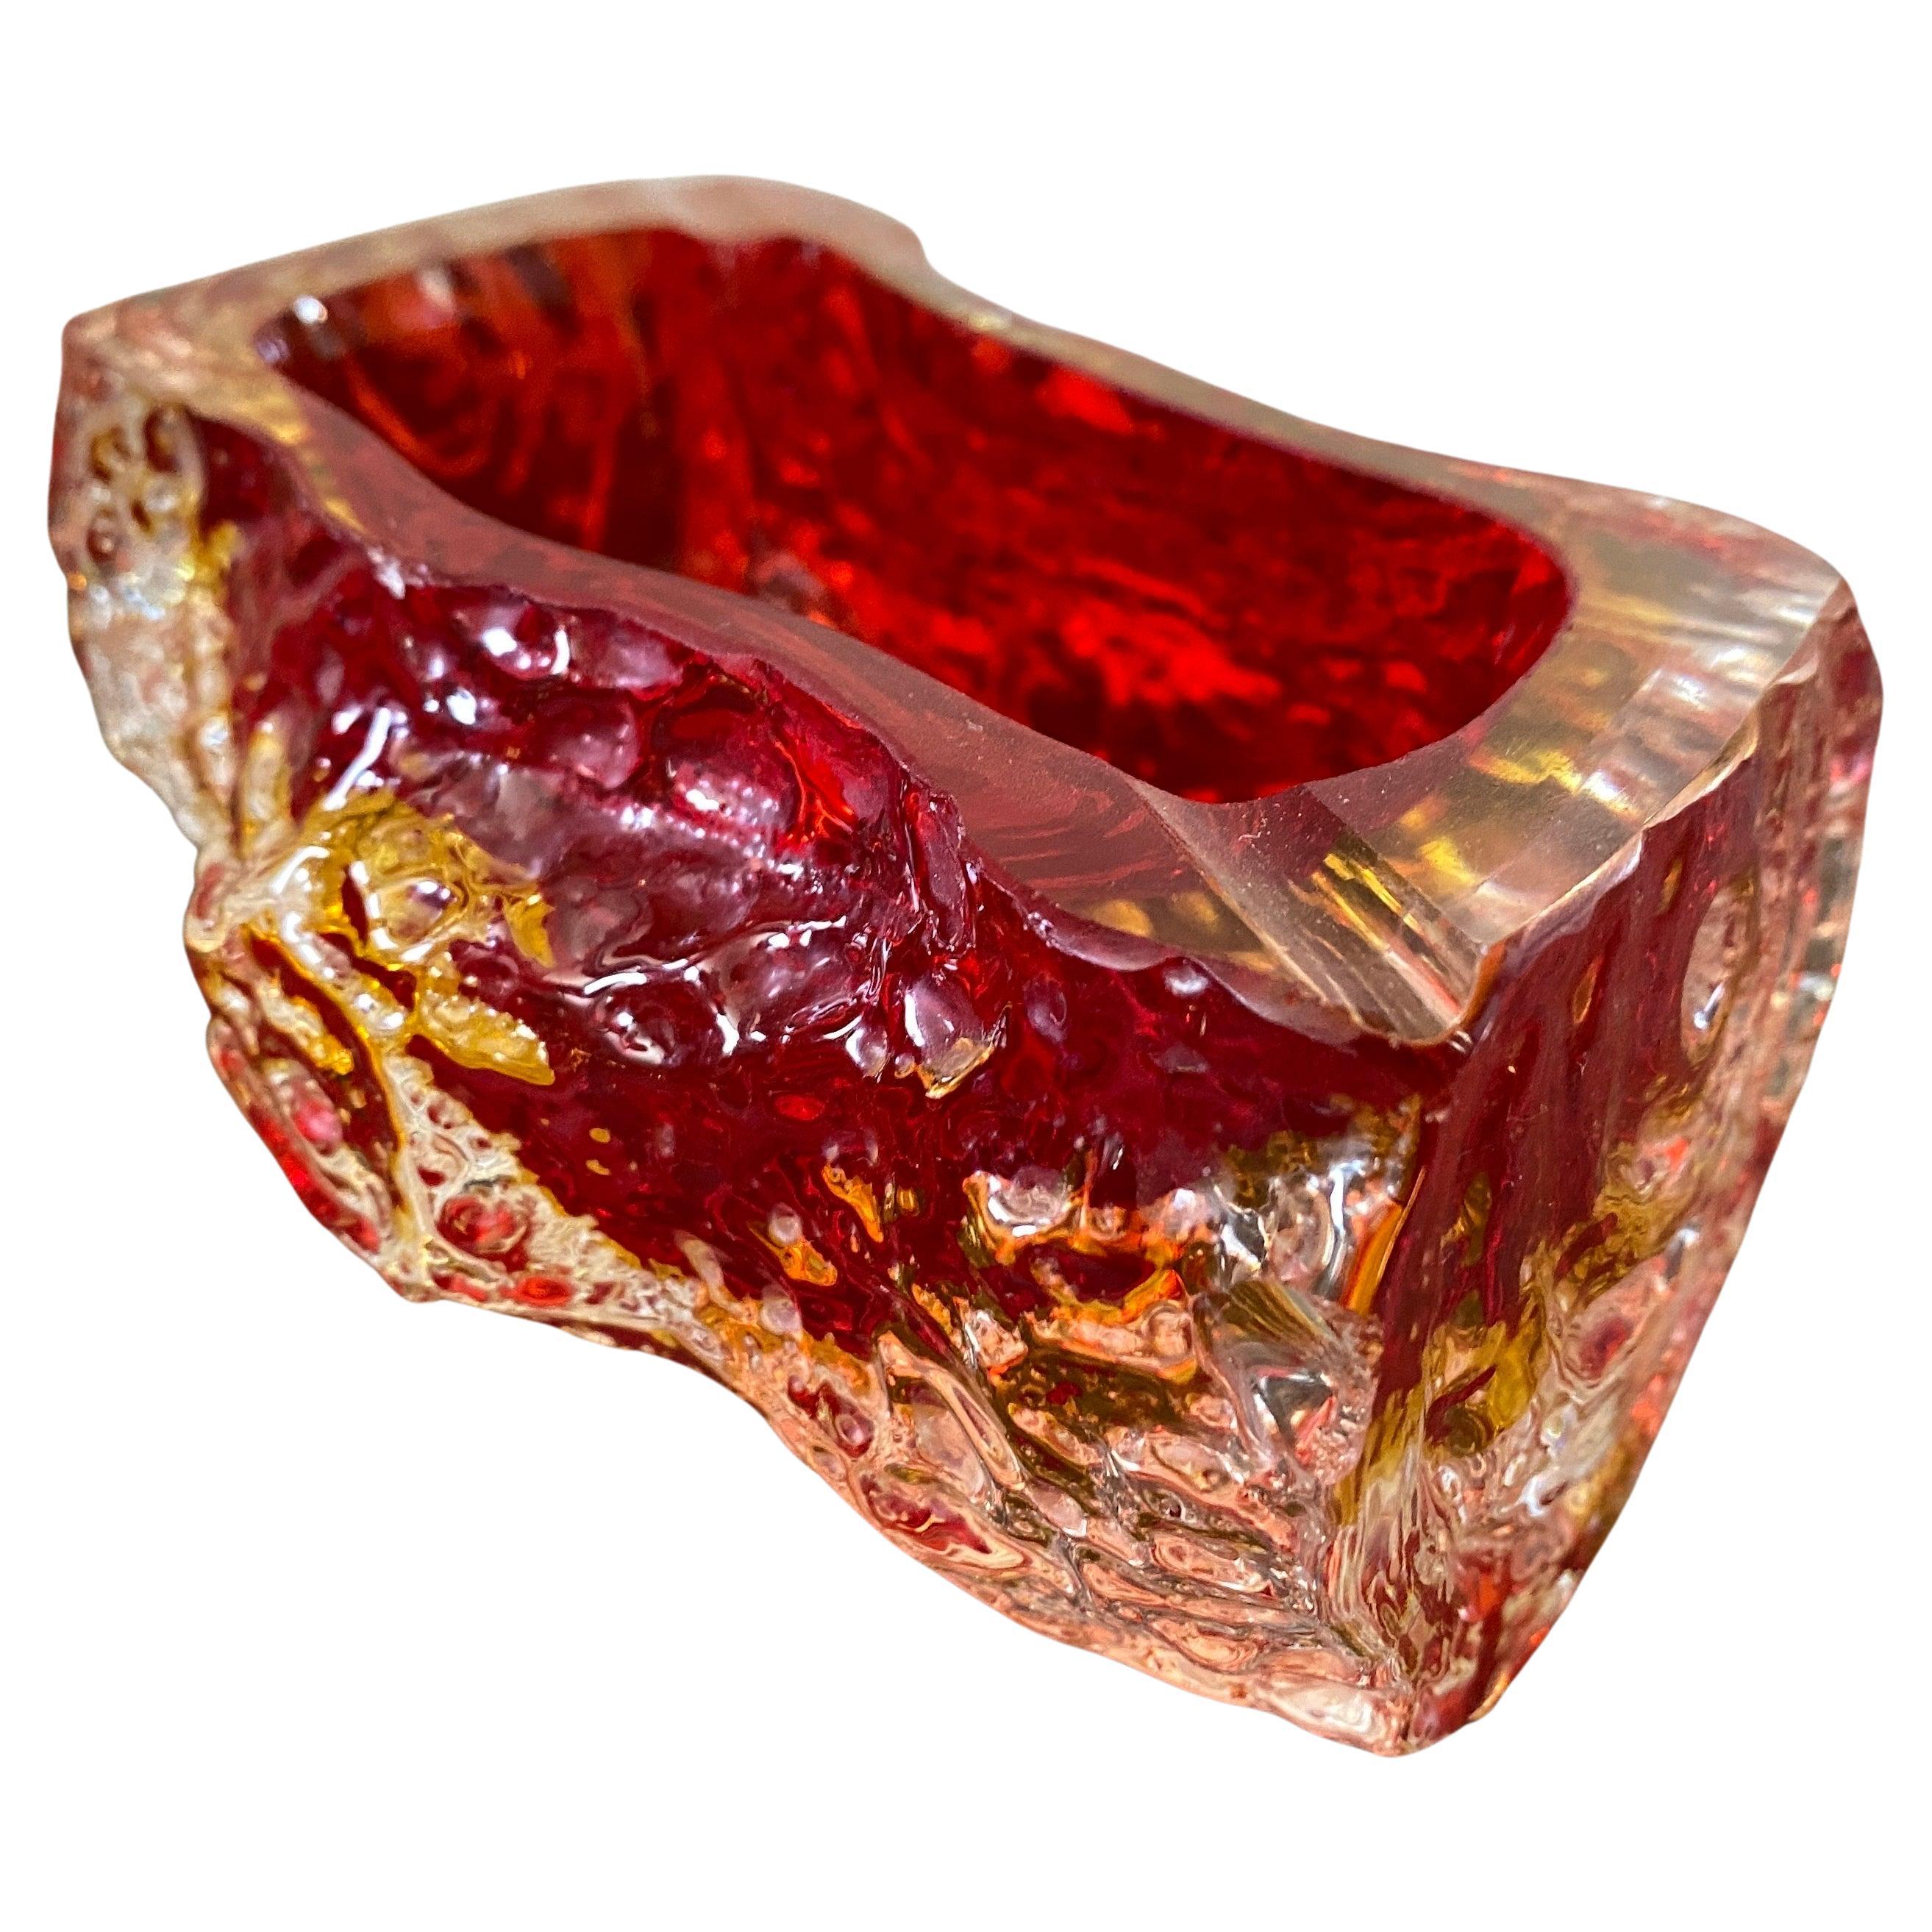 A red sommerso murano glass bowl designed and manufactured in Venice in the Seventies by Mandruzzato. It's in lovely conditions, probably never used as ashtray. Crafted by the skilled artisans at Mandruzzato in the 1970s, this modernist ashtray